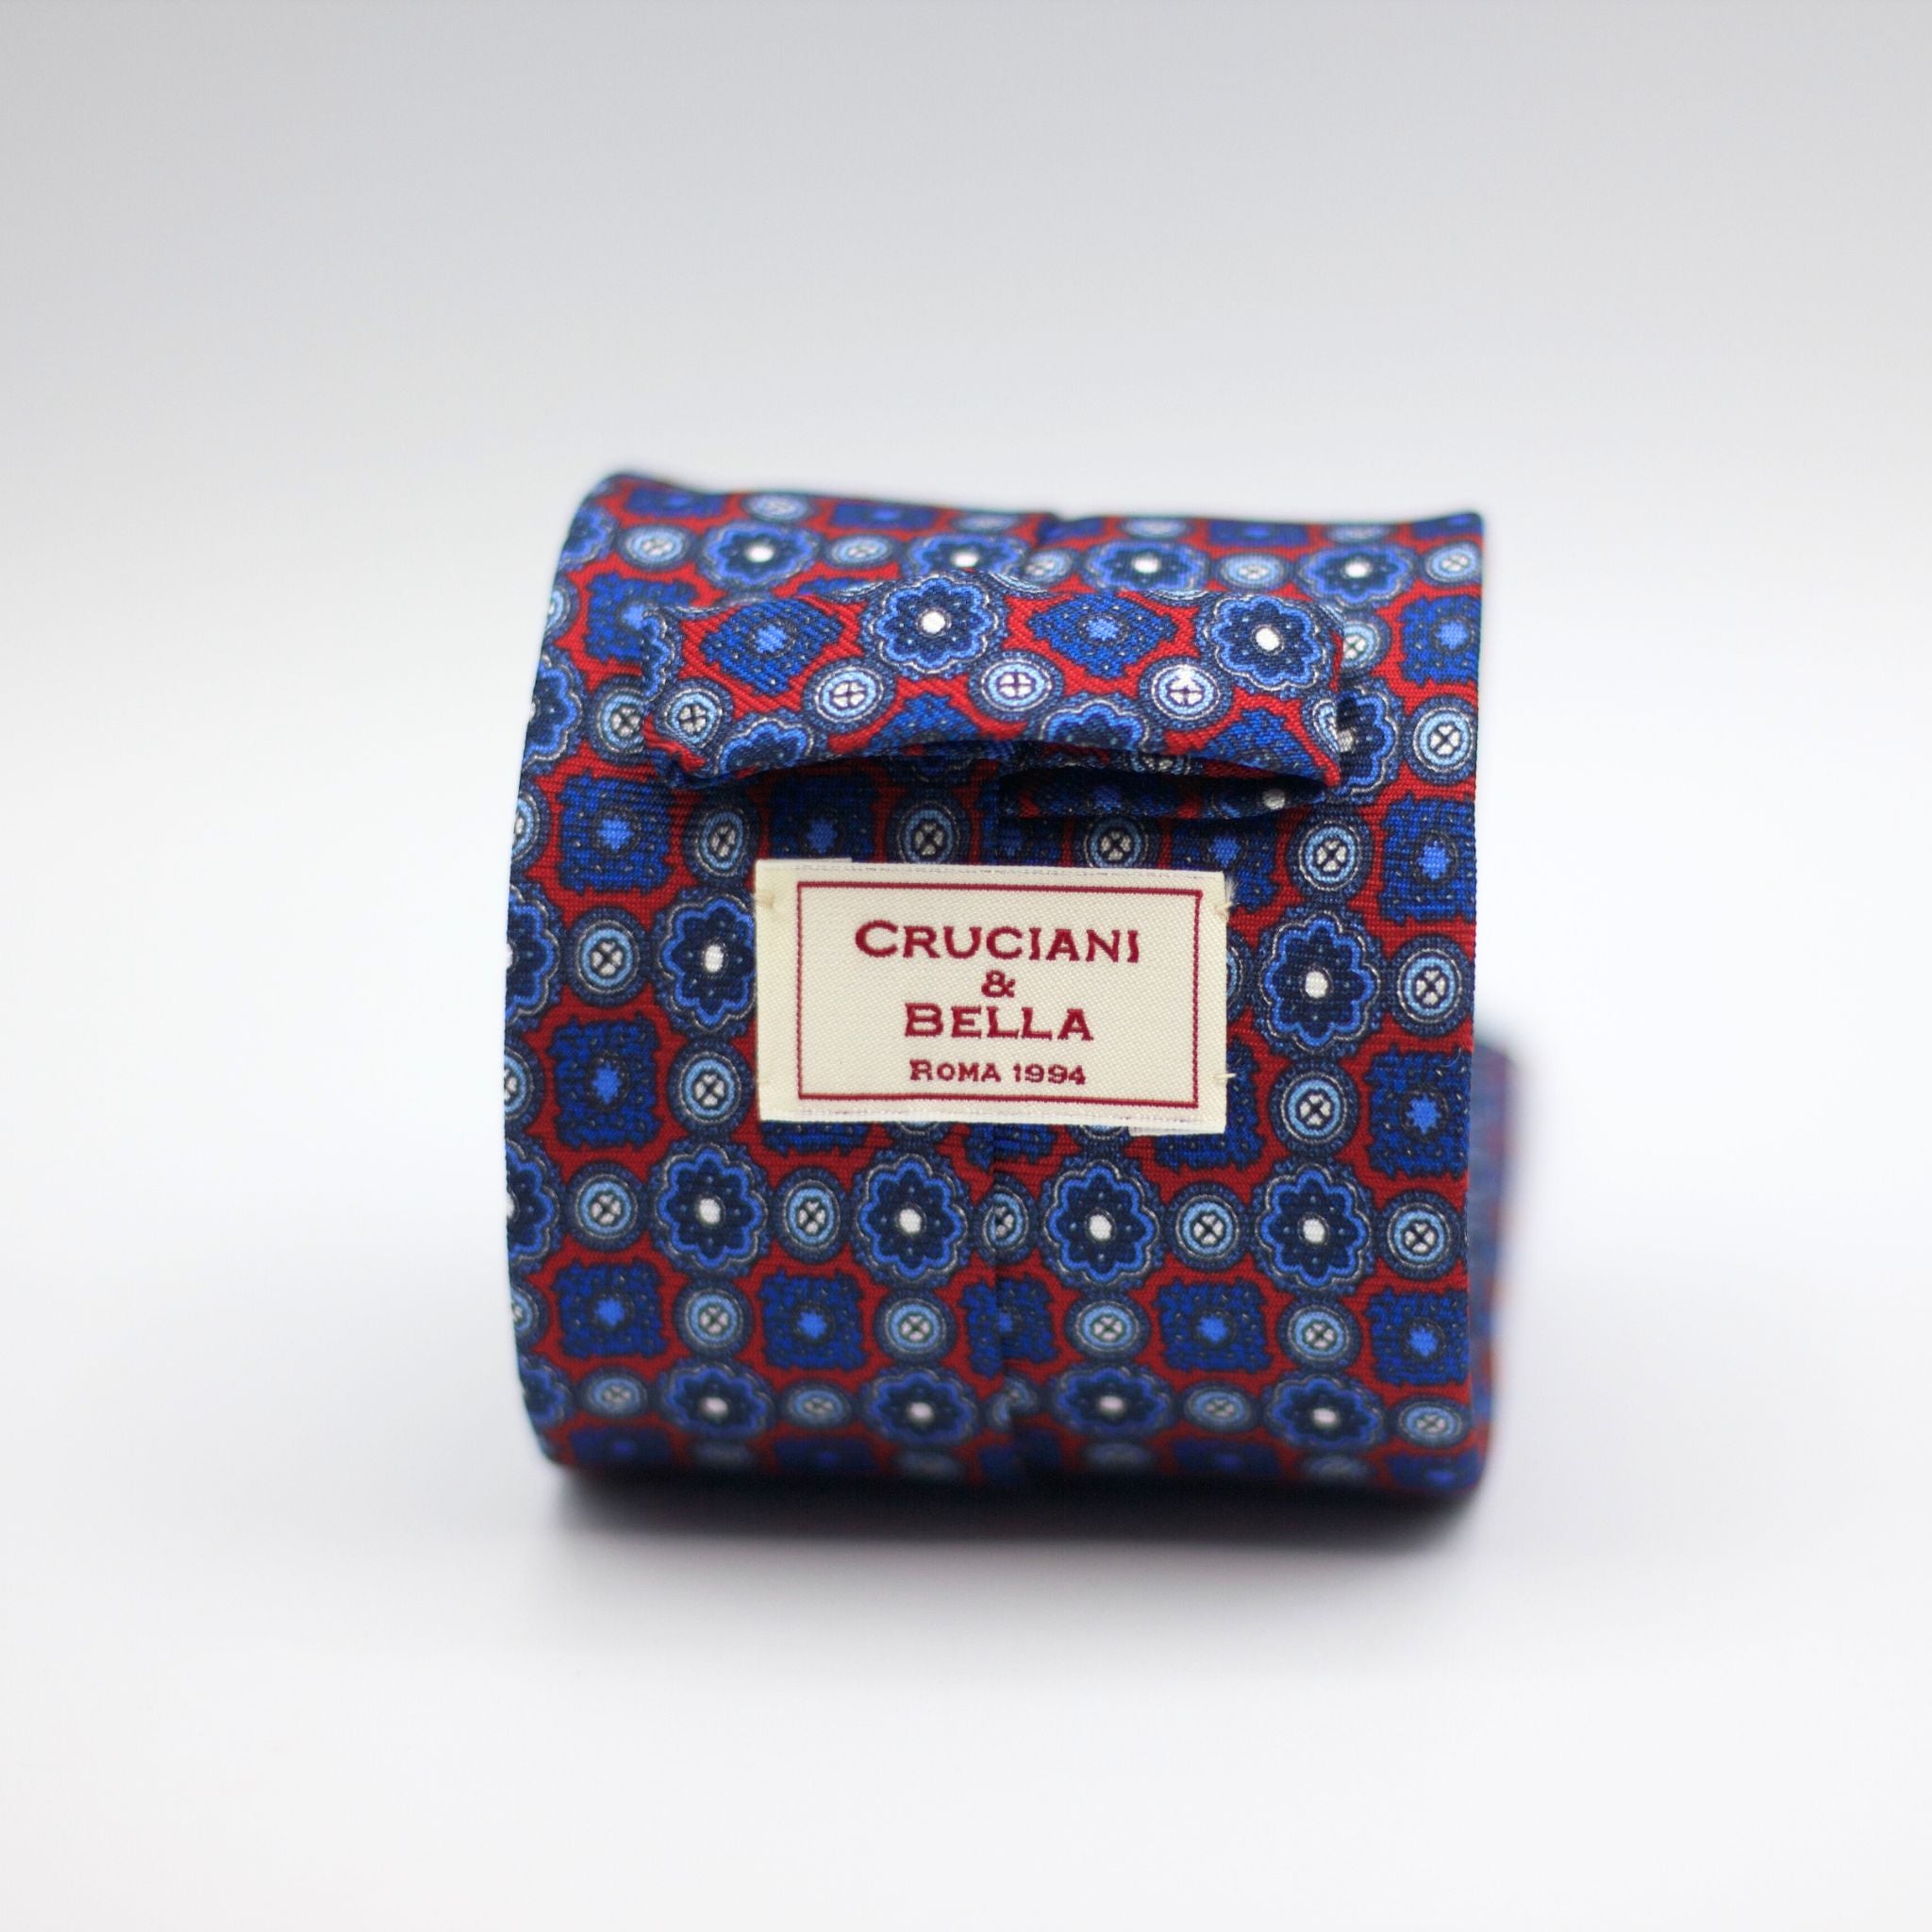 Cruciani & Bella 100% Silk Printed Self-Tipped Red, Blue, light blue and white motif Tie Handmade in Rome, Italy. 8 cm x 150 cm